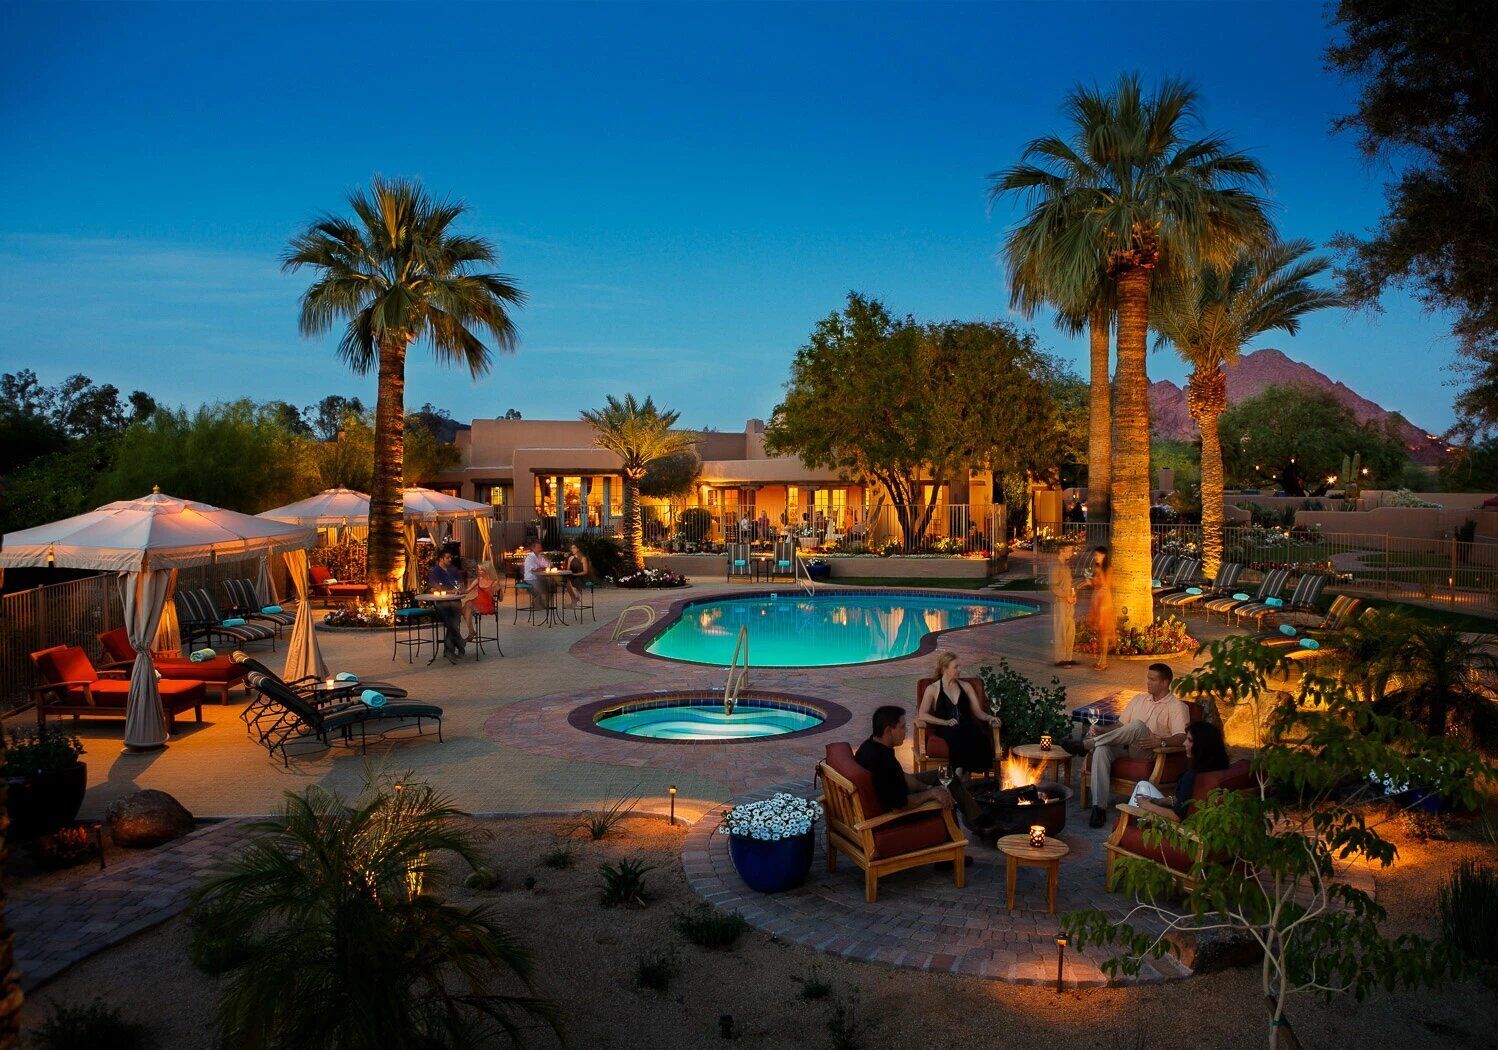 Top 8 best resort hotels in Arizona for your idealistic vacation in the copper state